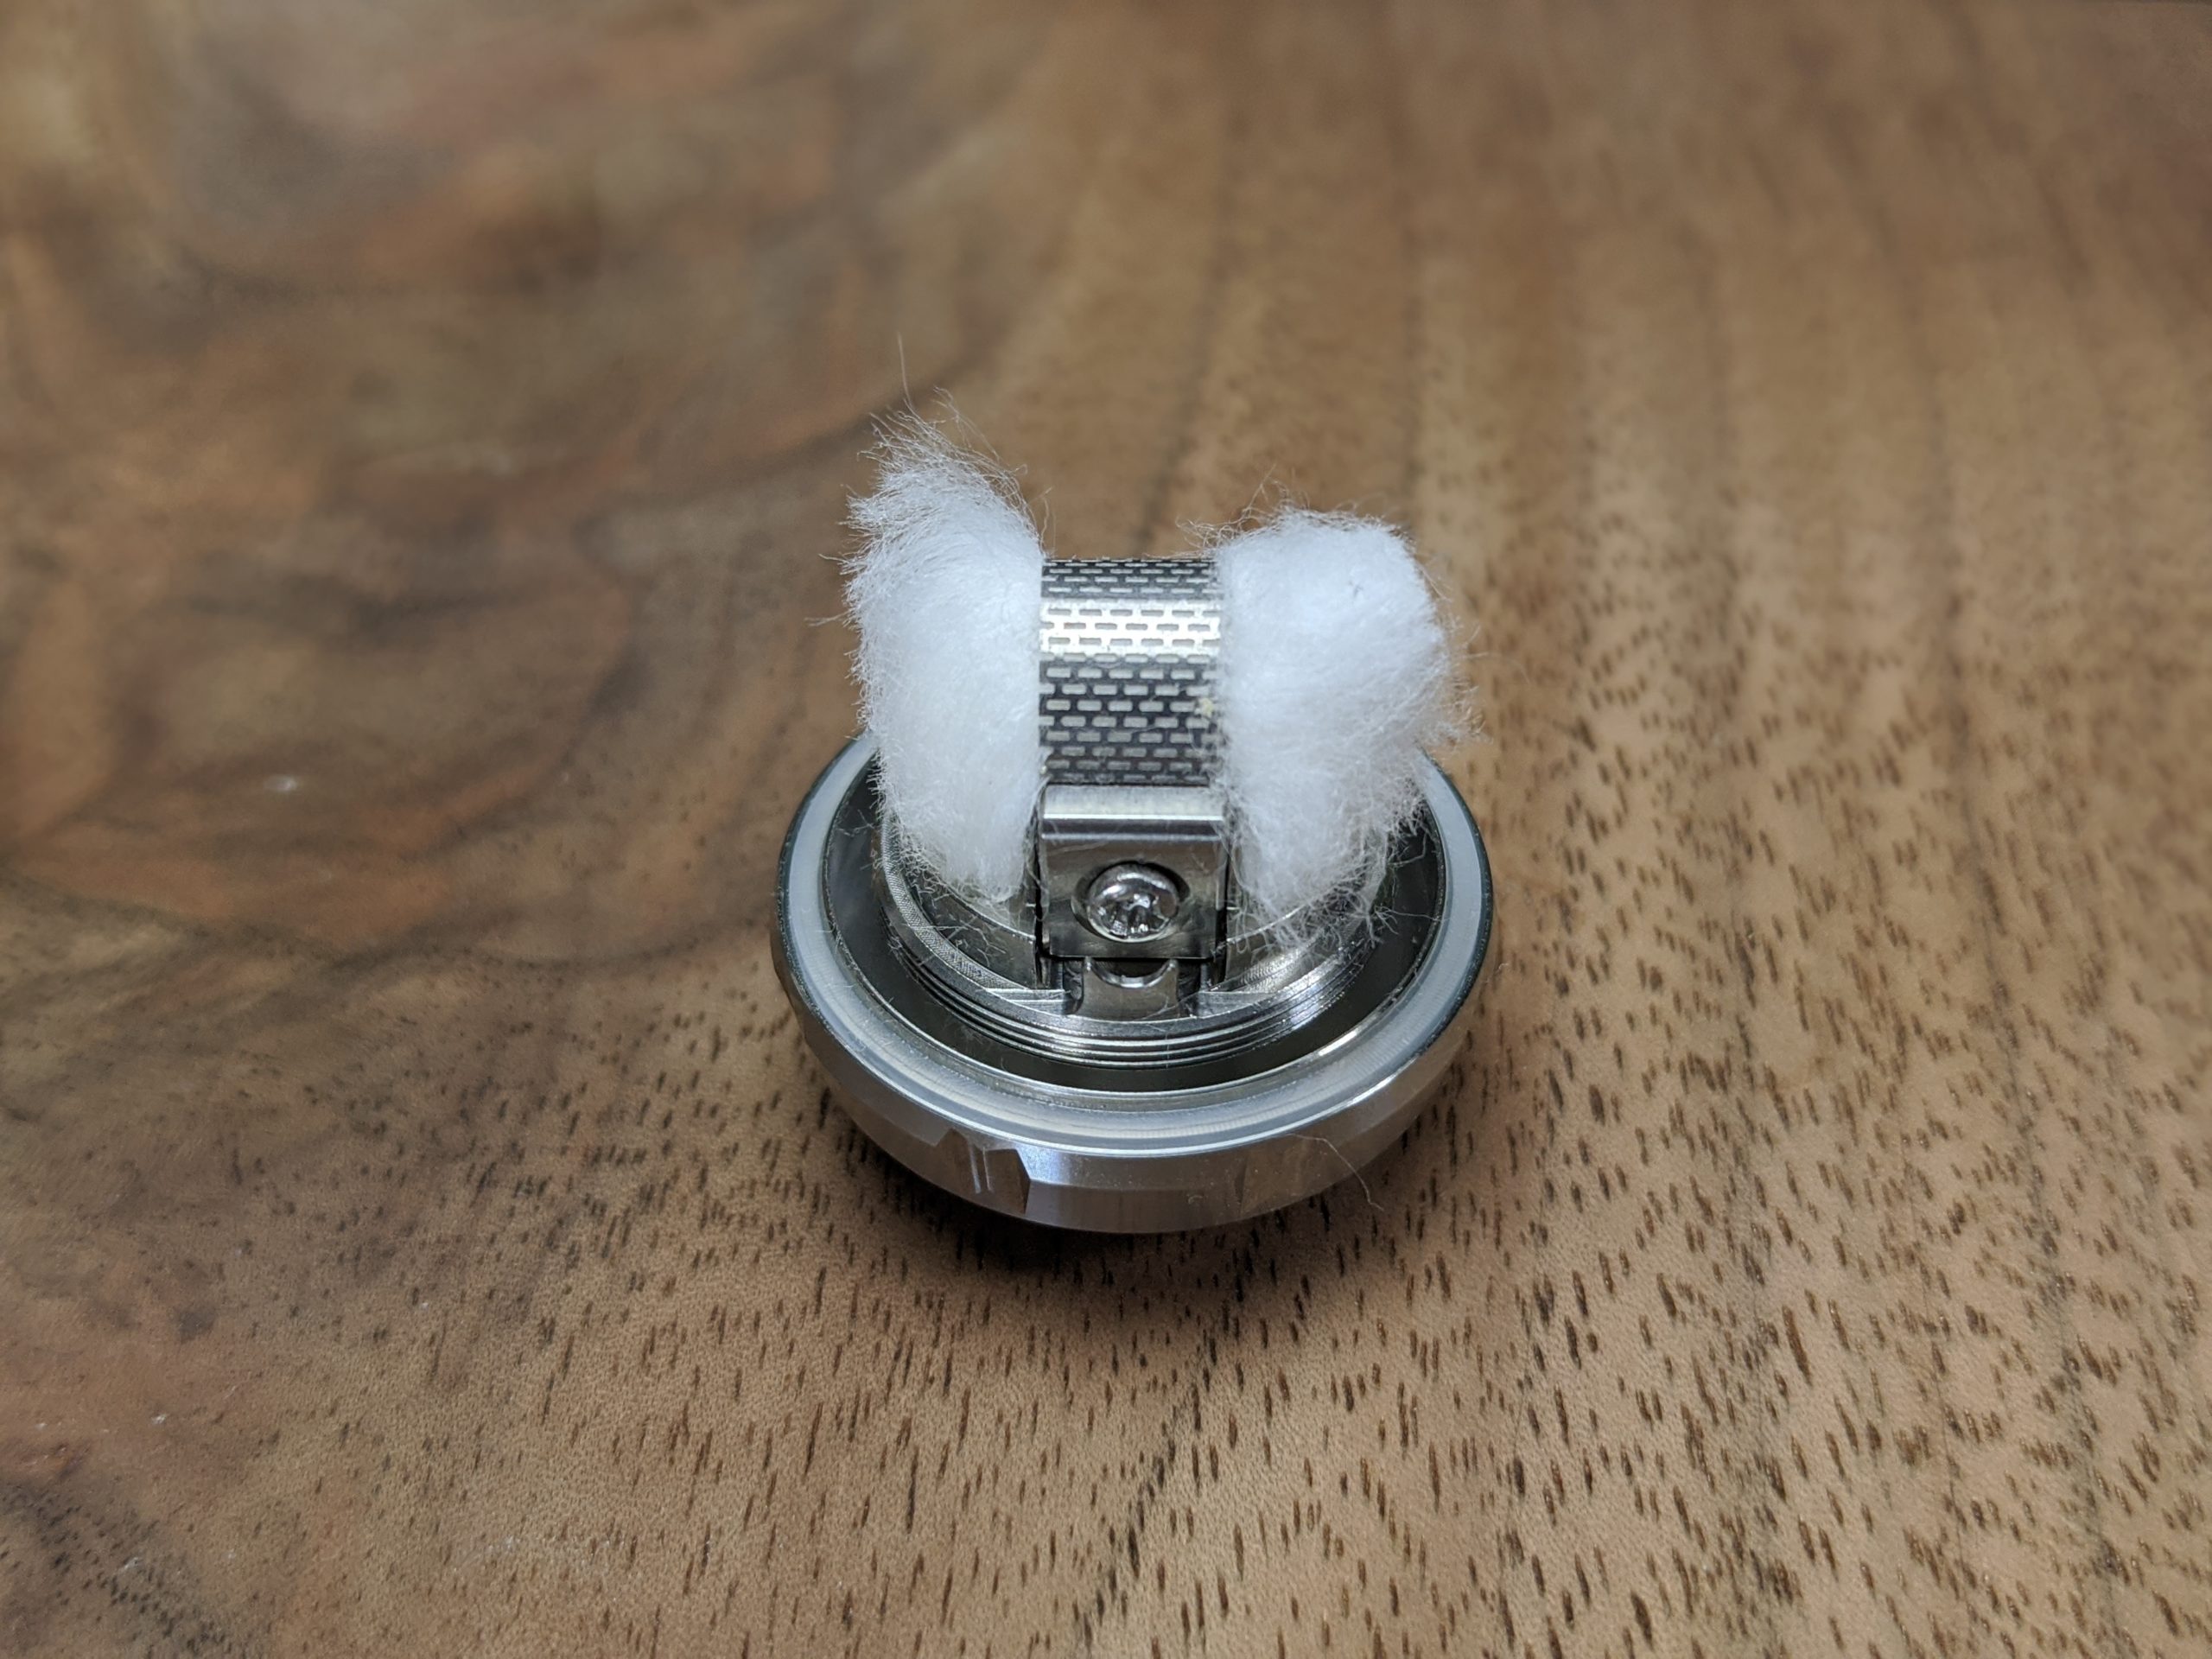 Premier Maria Papa Honest review time: The Zeus X Mesh RTA from Geekvape